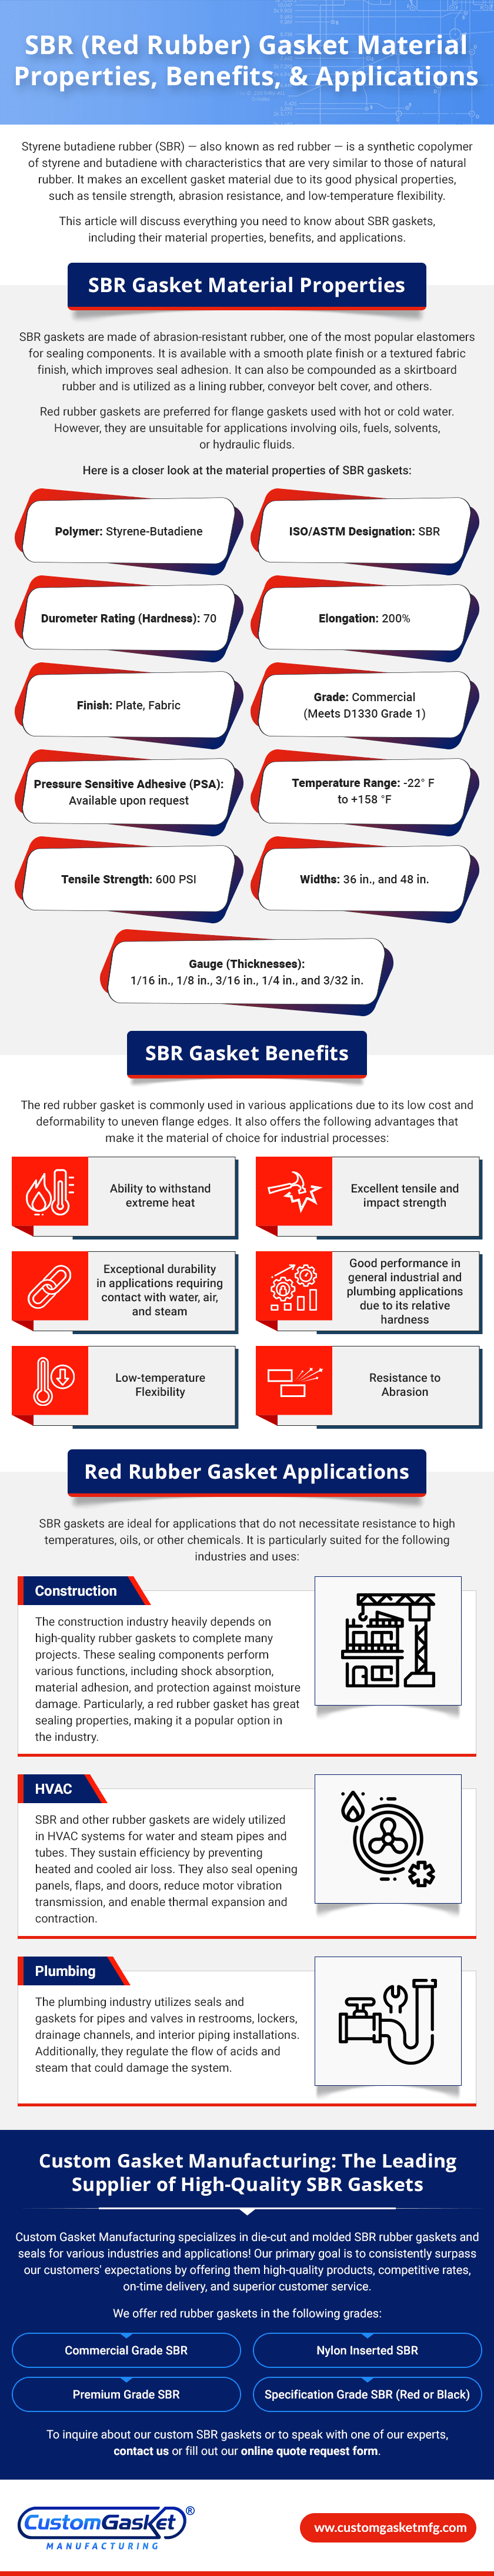 SBR-Red-Rubber-Gasket-Material-Properties-Benefits-and-Applications